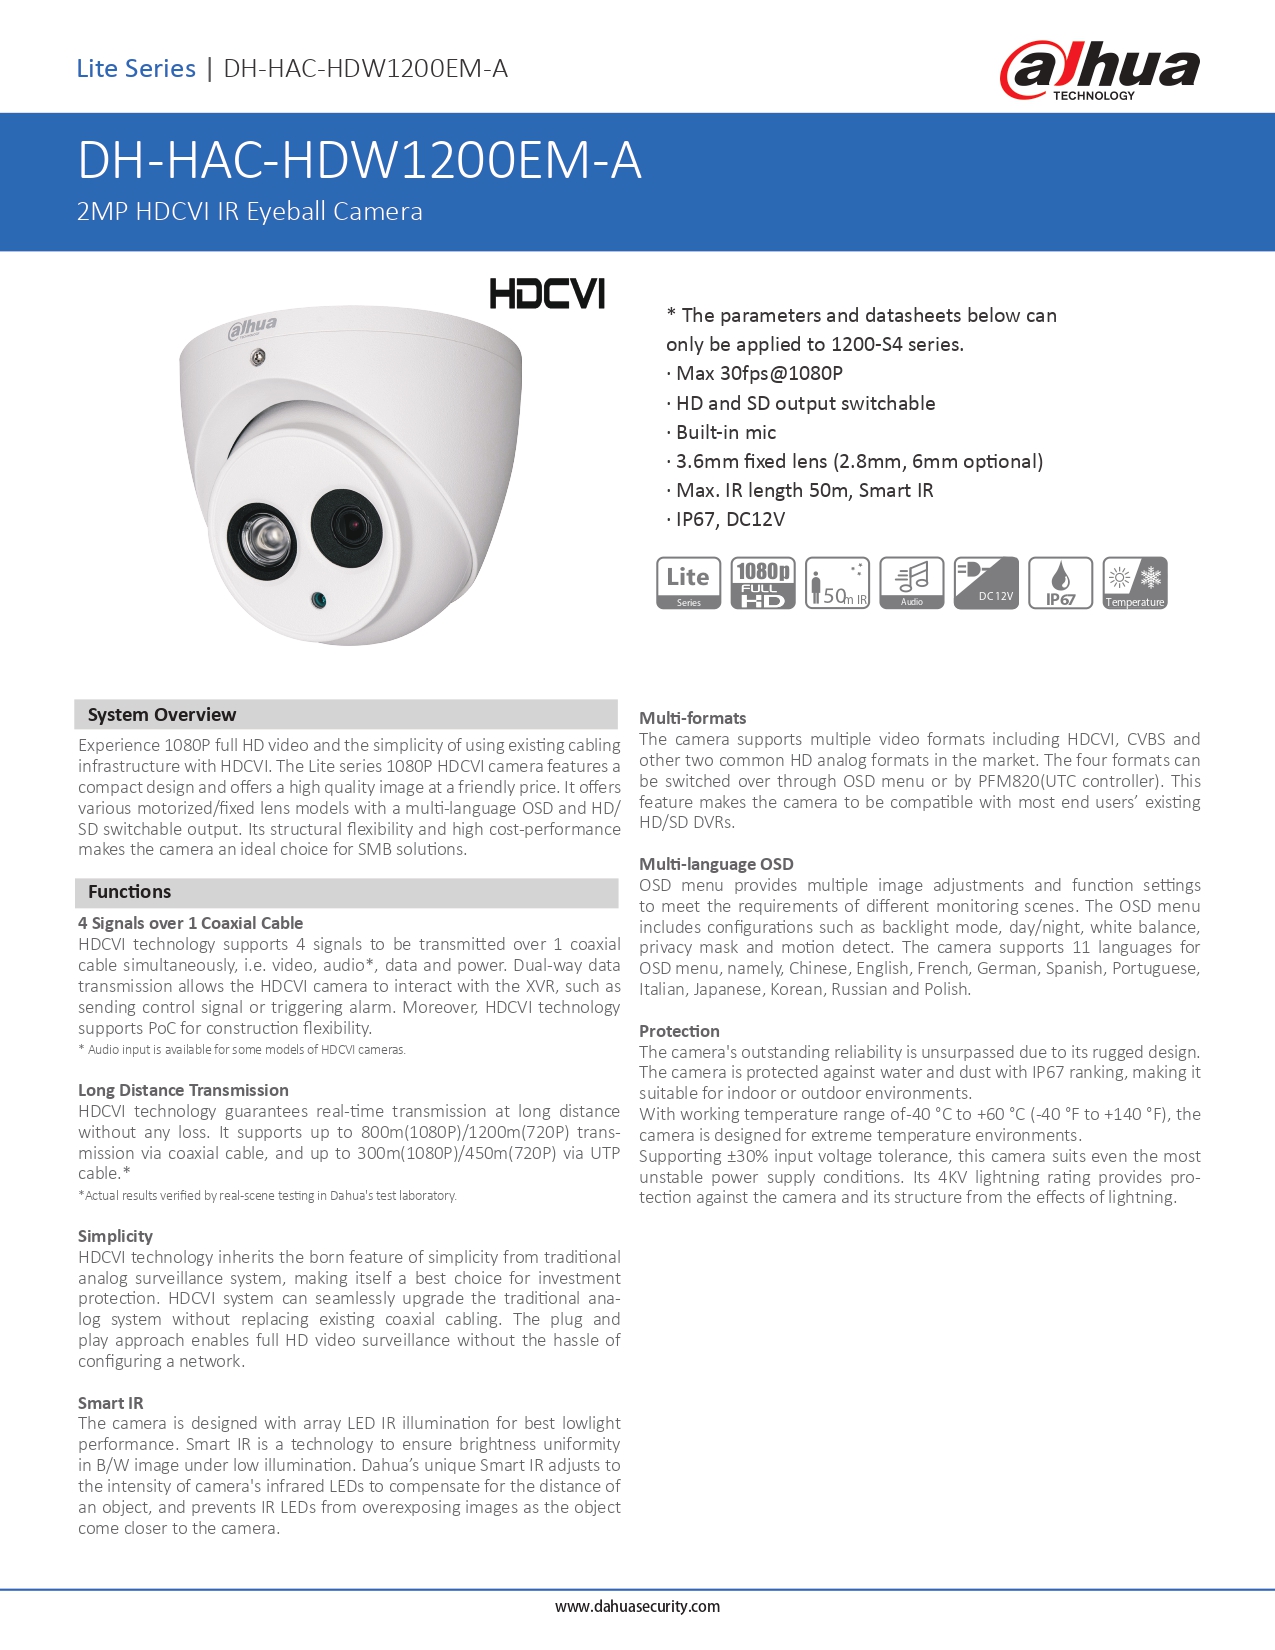 Dahua DH-HAC-HDW1200EM-A HD CCTV Camera Solution – 3 CAM Package | IR Night Vision | with Installation | Full HD 1080 | 24Hrs Recording